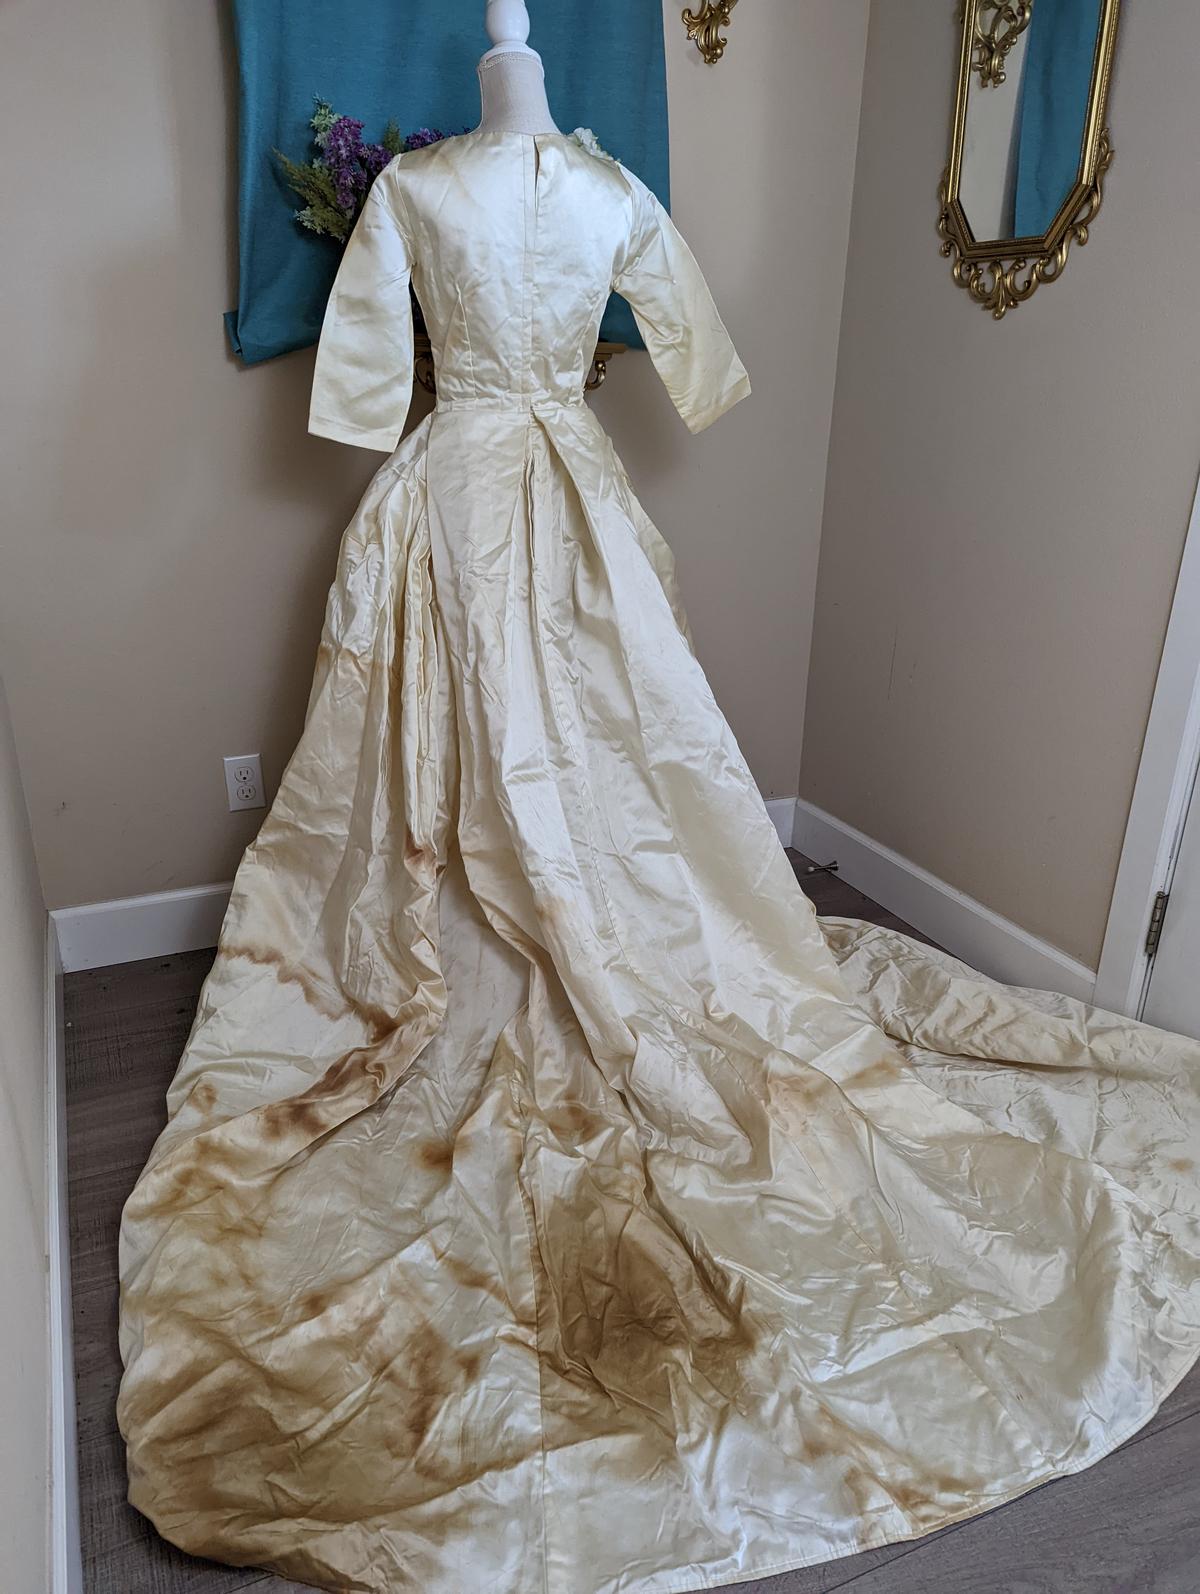 The dress had hard-to-clean stains that made the restoration process even more challenging. (Courtesy of <a href="https://www.instagram.com/hobbybobbins/">Hobby Bobbins</a>)